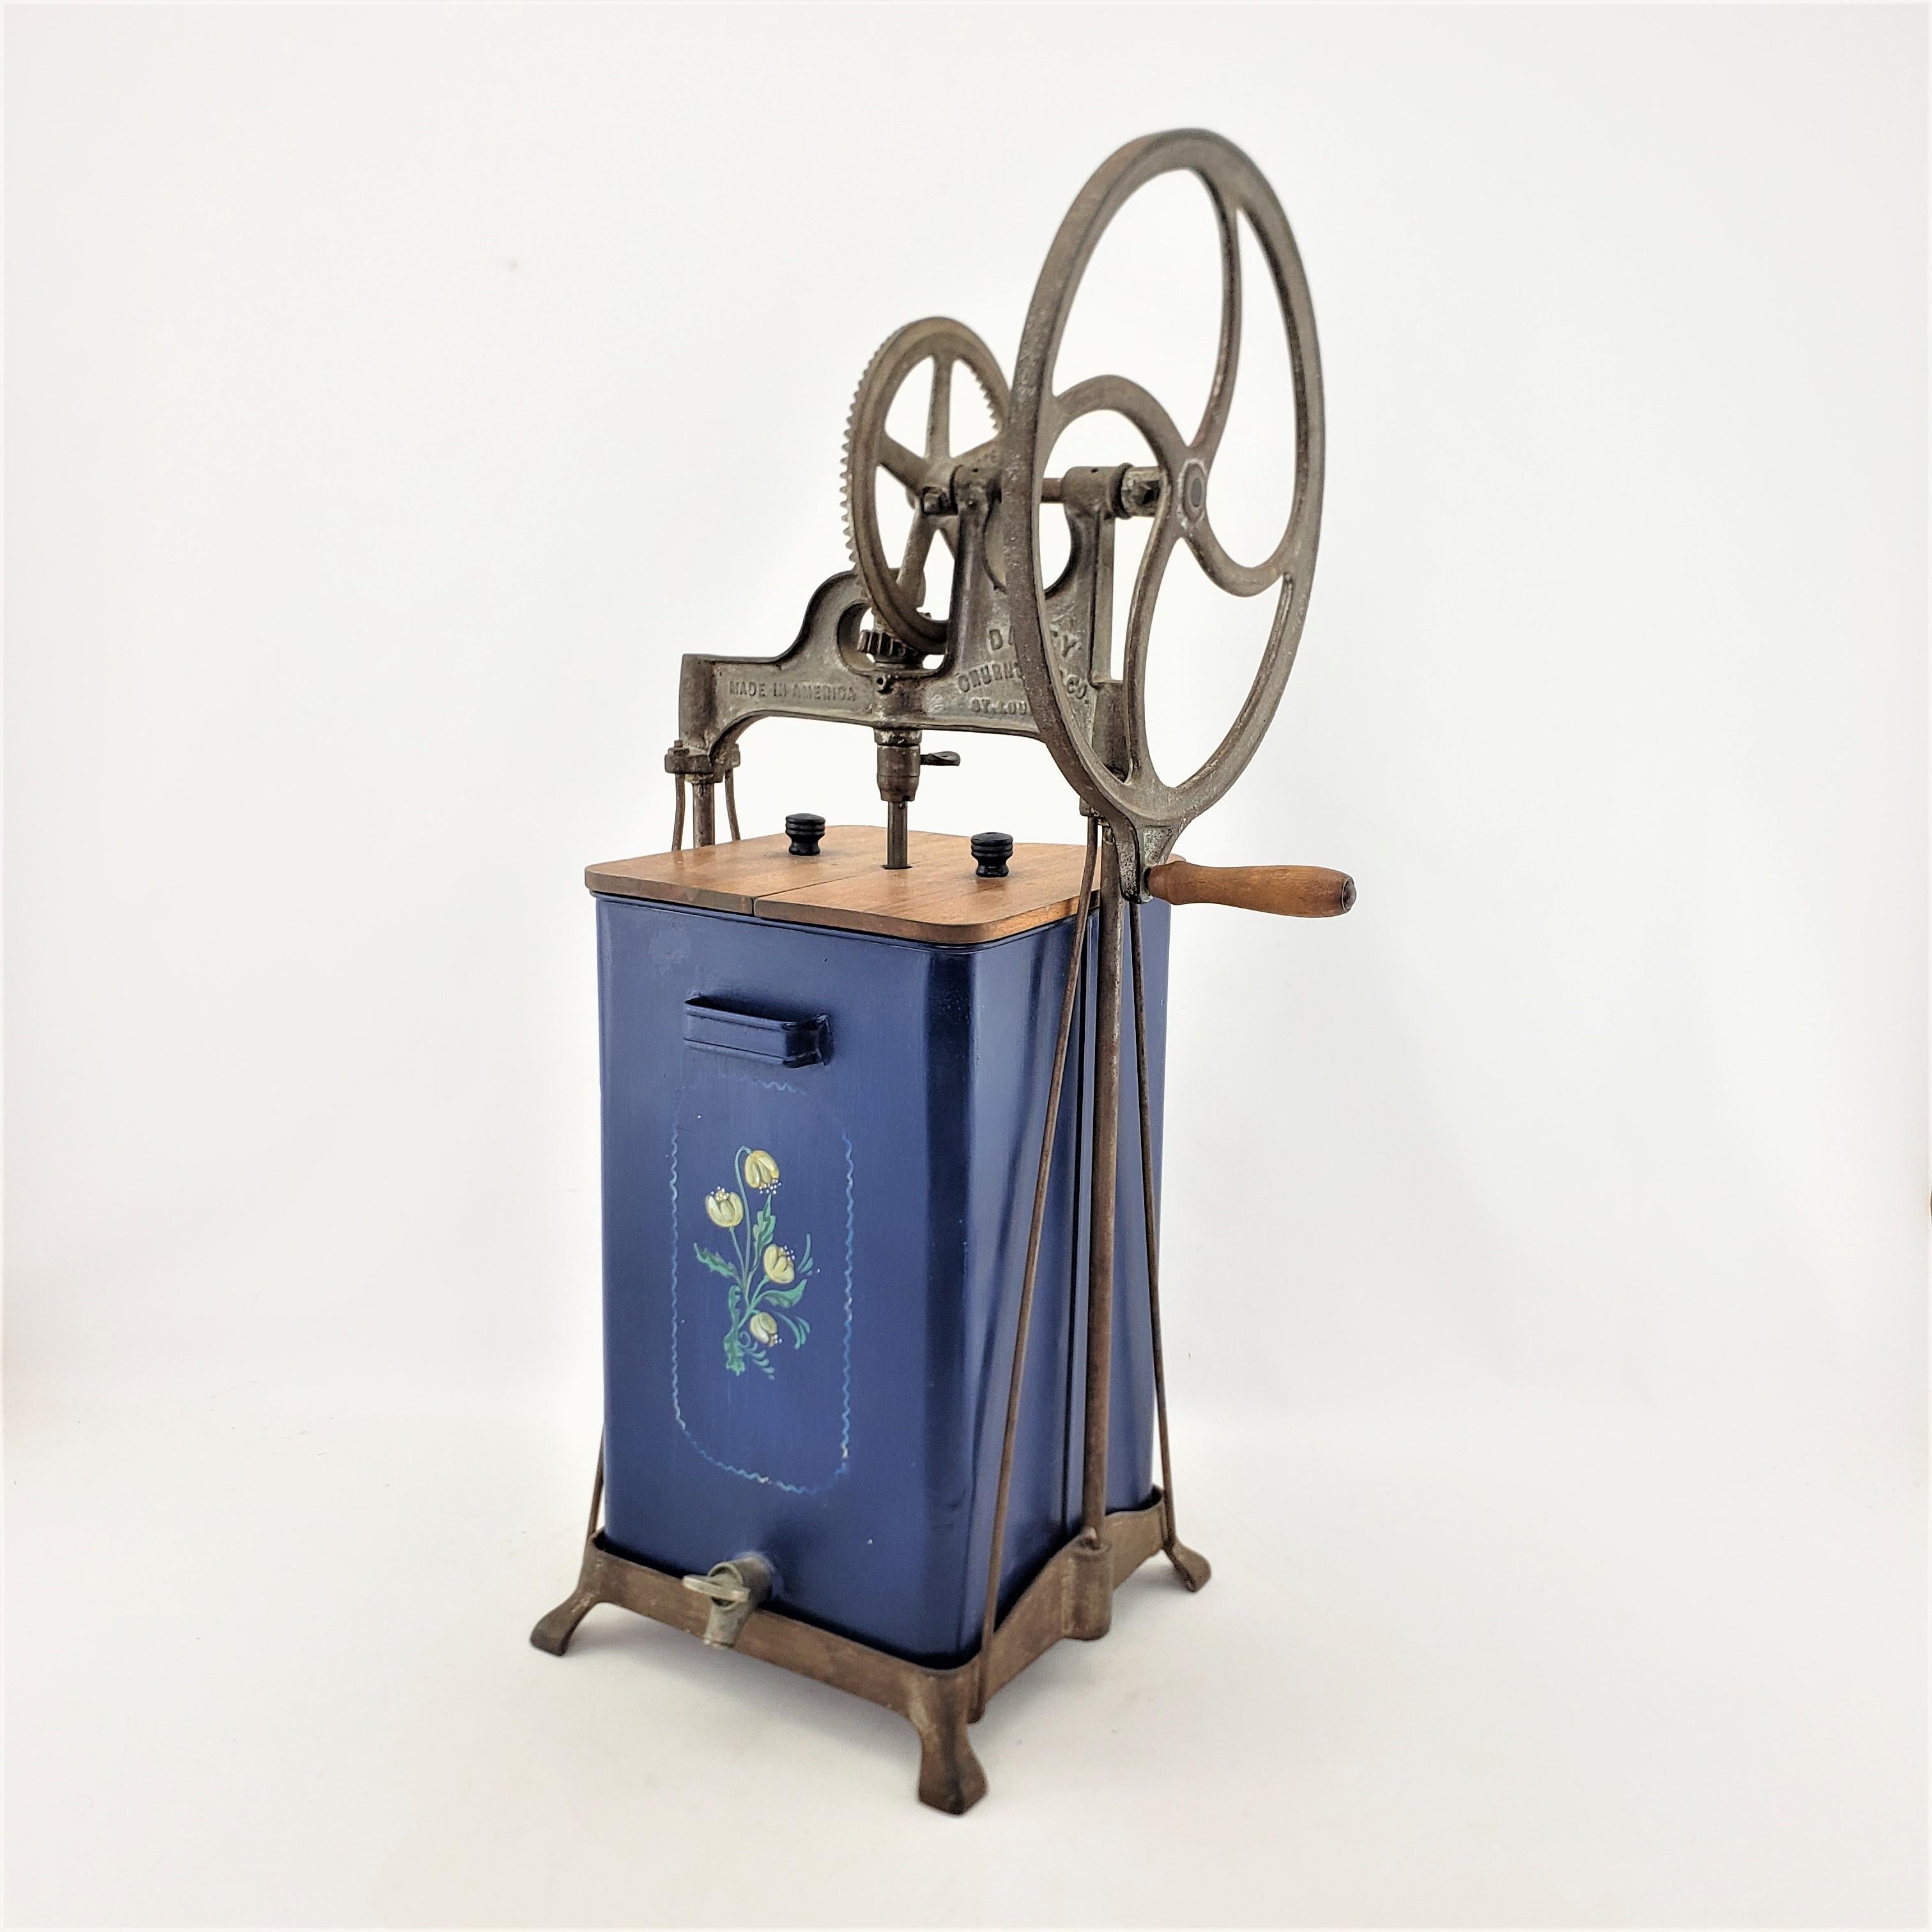 This antique commercial churn or mixer was made by the Dazey Manufacturing Company of St. Louis in approximately 1920 in a period Art Deco style. The frame and gear mechanism of the churn were made with cast metal and the container is made of steel.